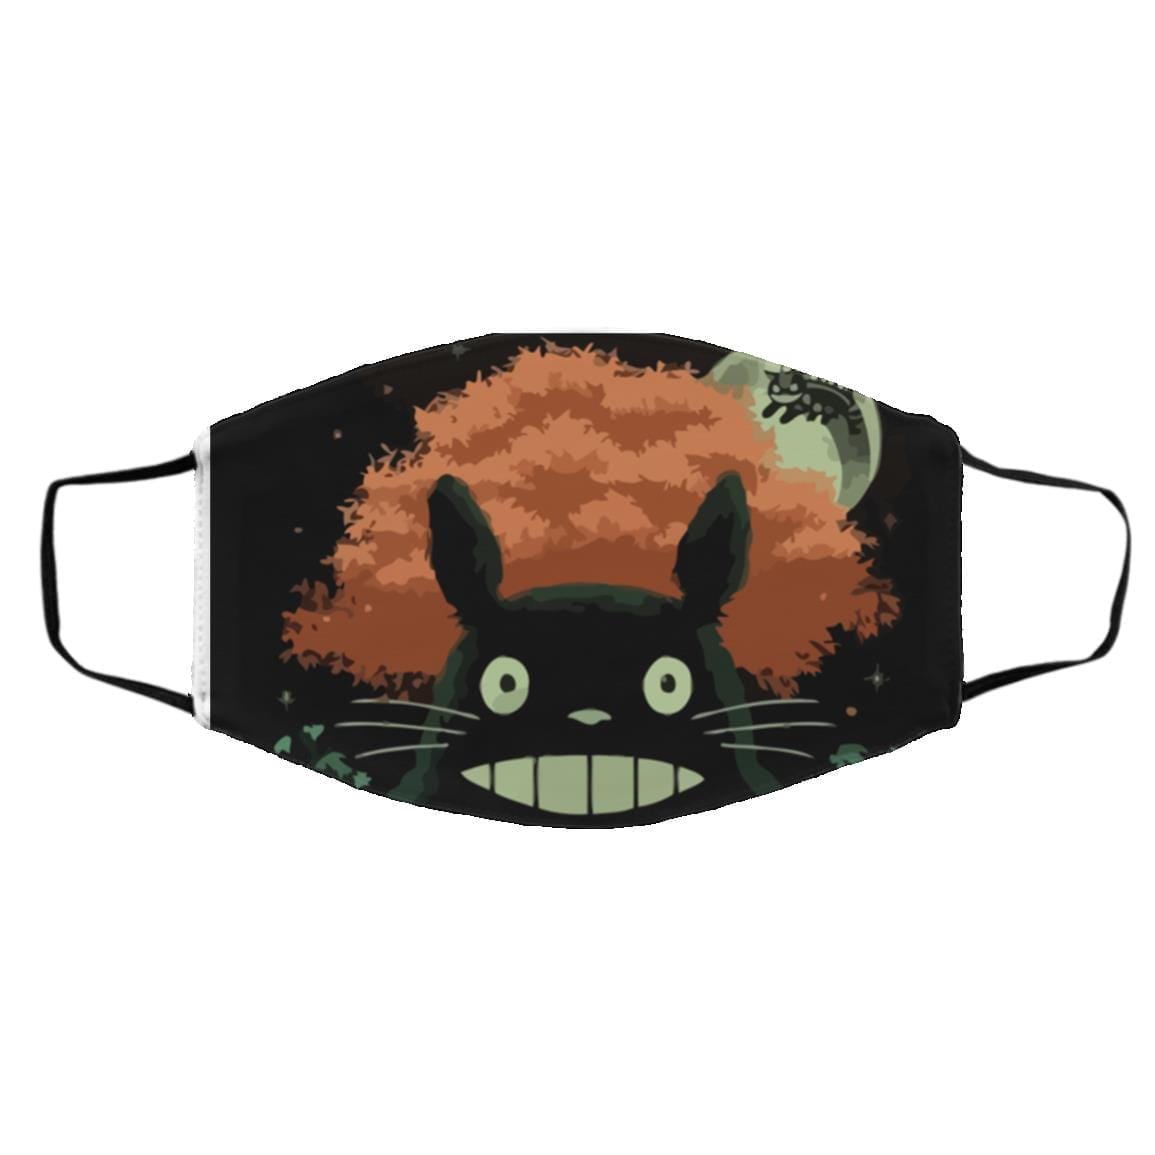 My Neighbor Totoro – The Magic Forest Face Mask